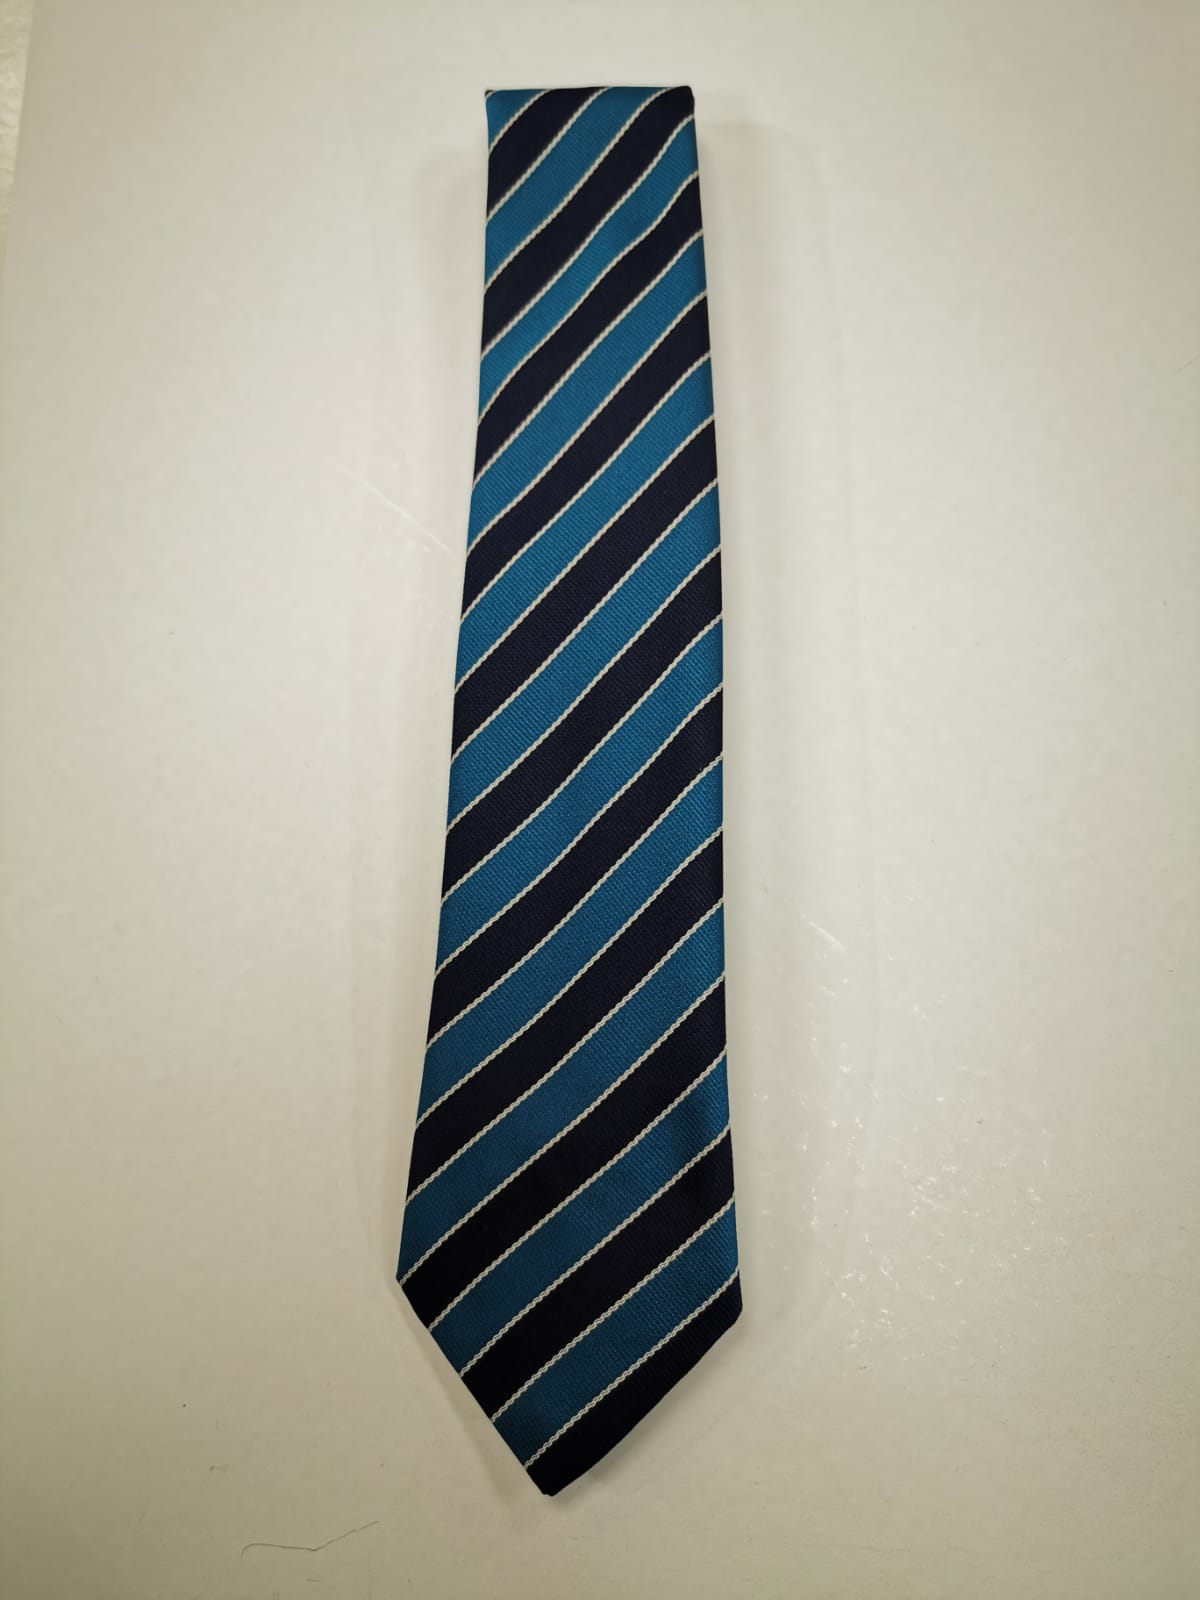 Castletroy College Tie - Mike O'Connells